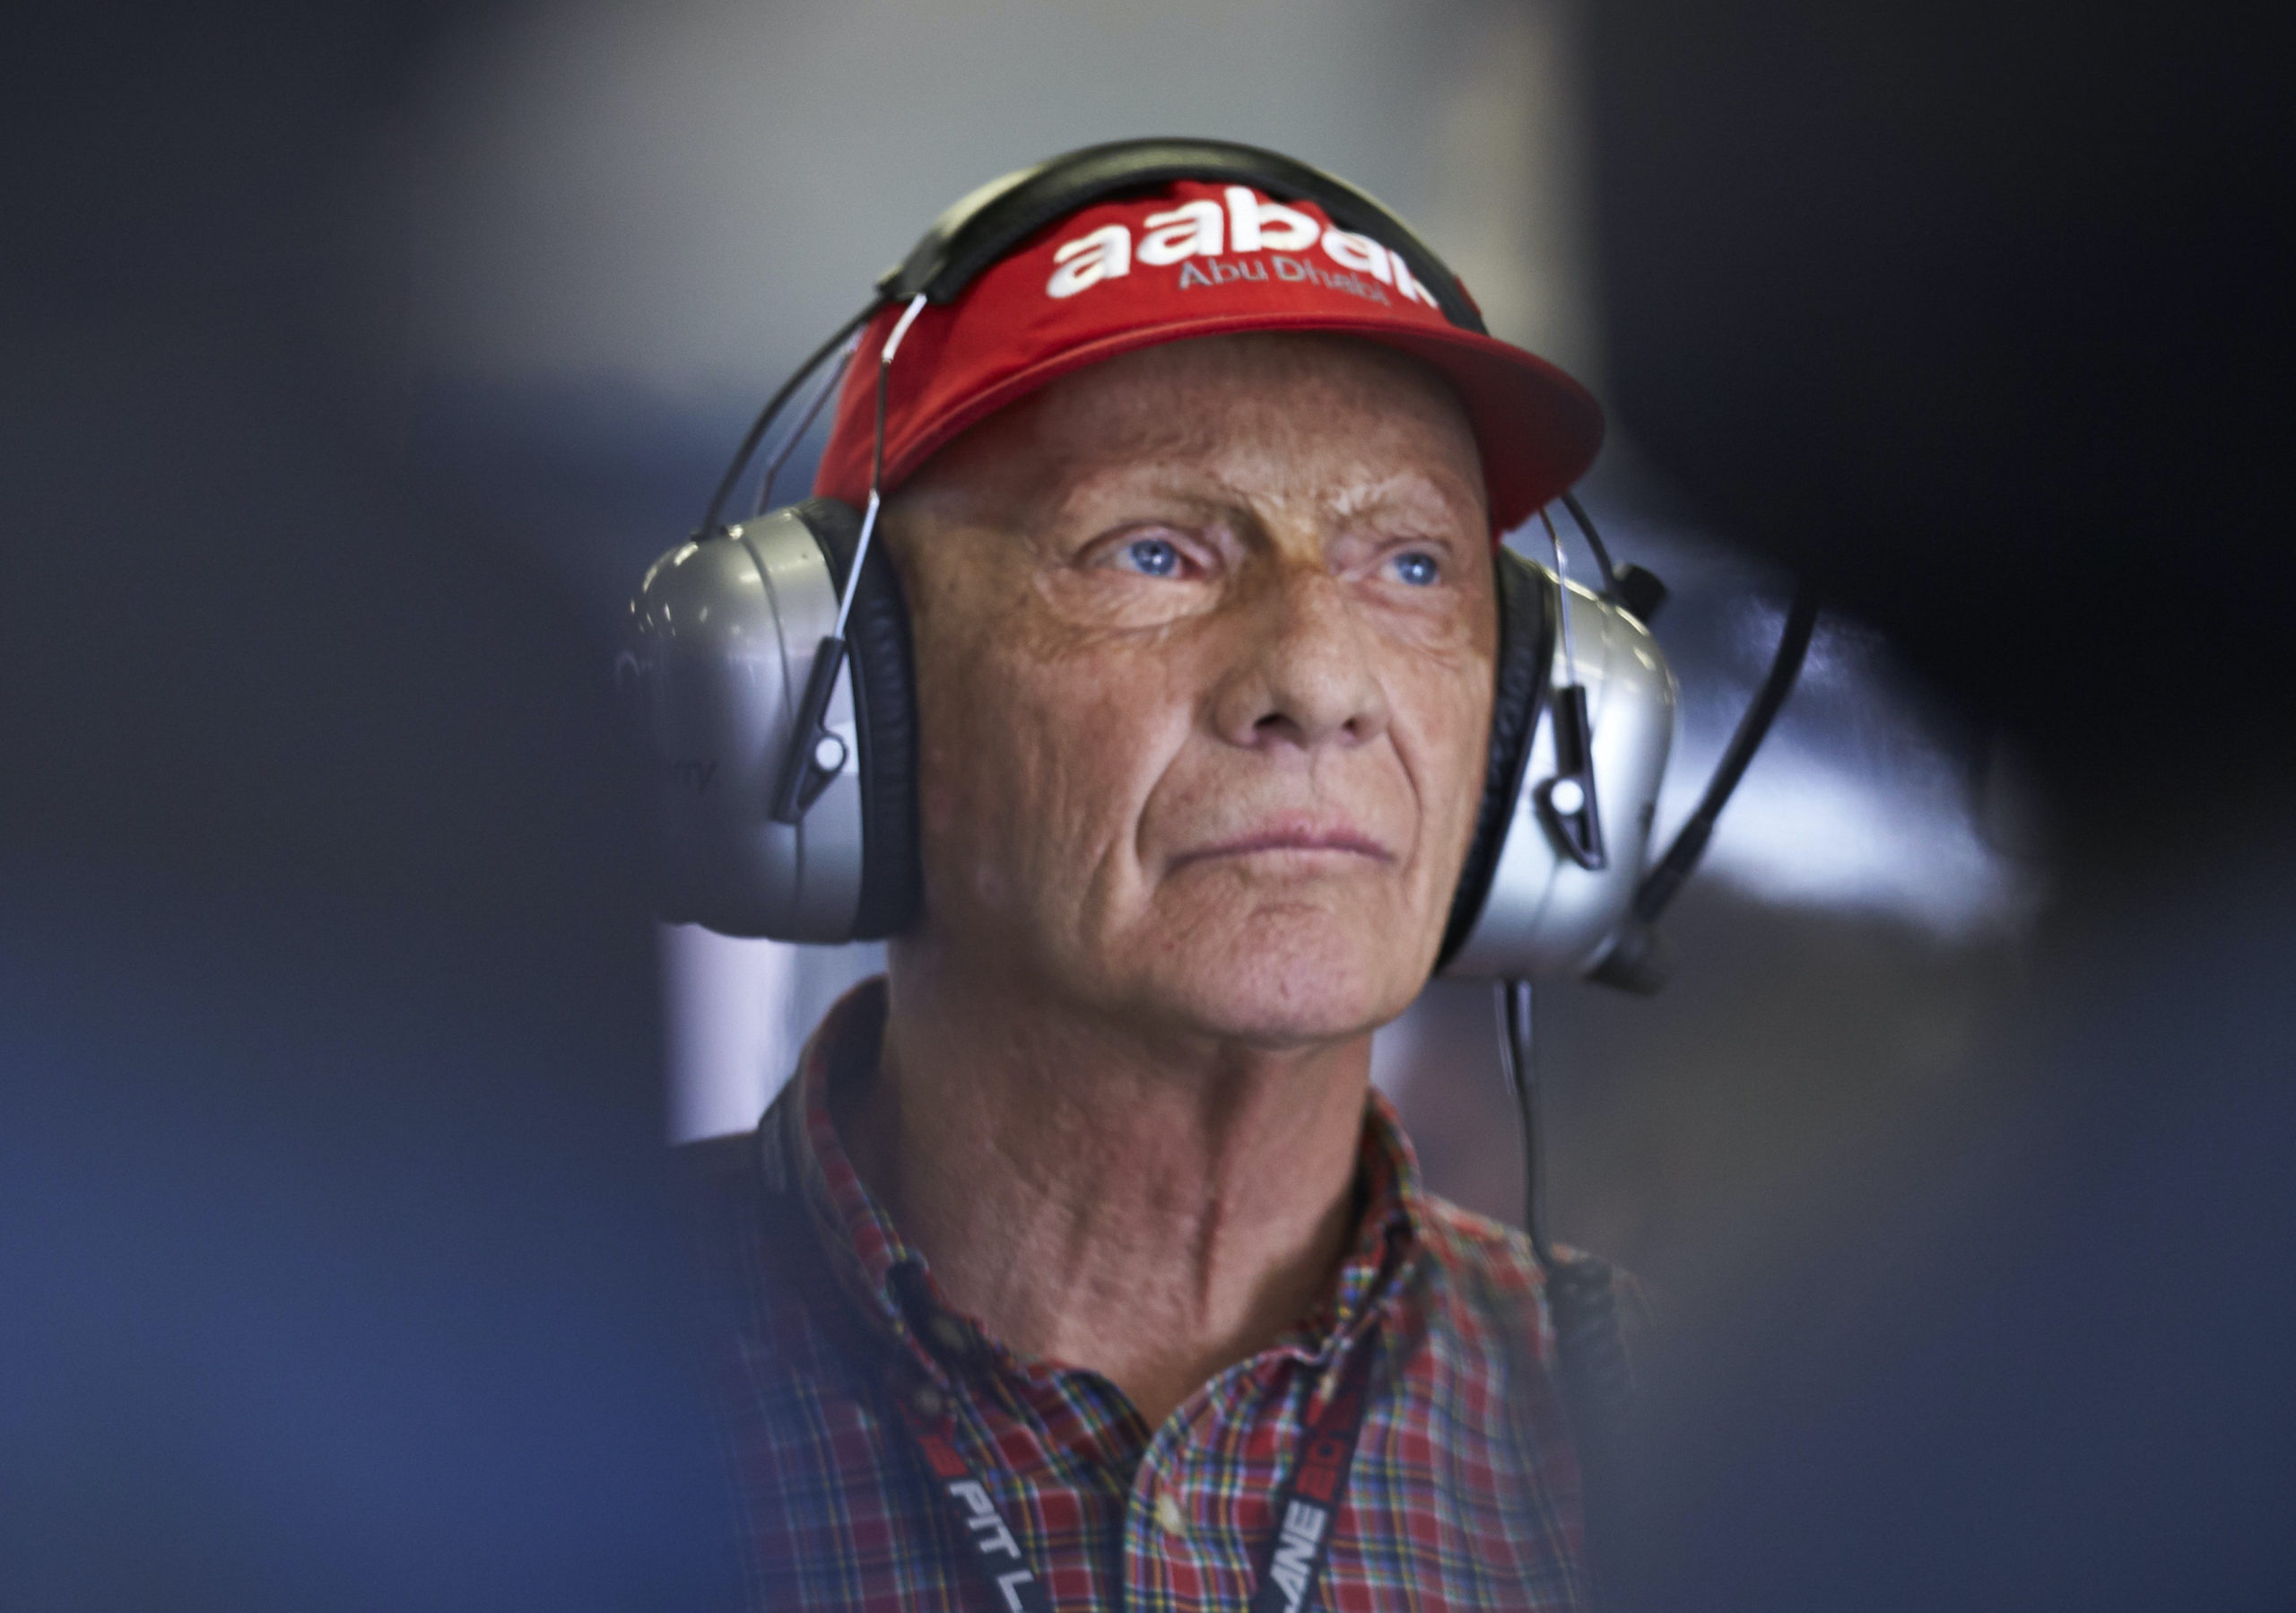 Business Air News - "Sparfell works to ensure Lauda legacy lives on"